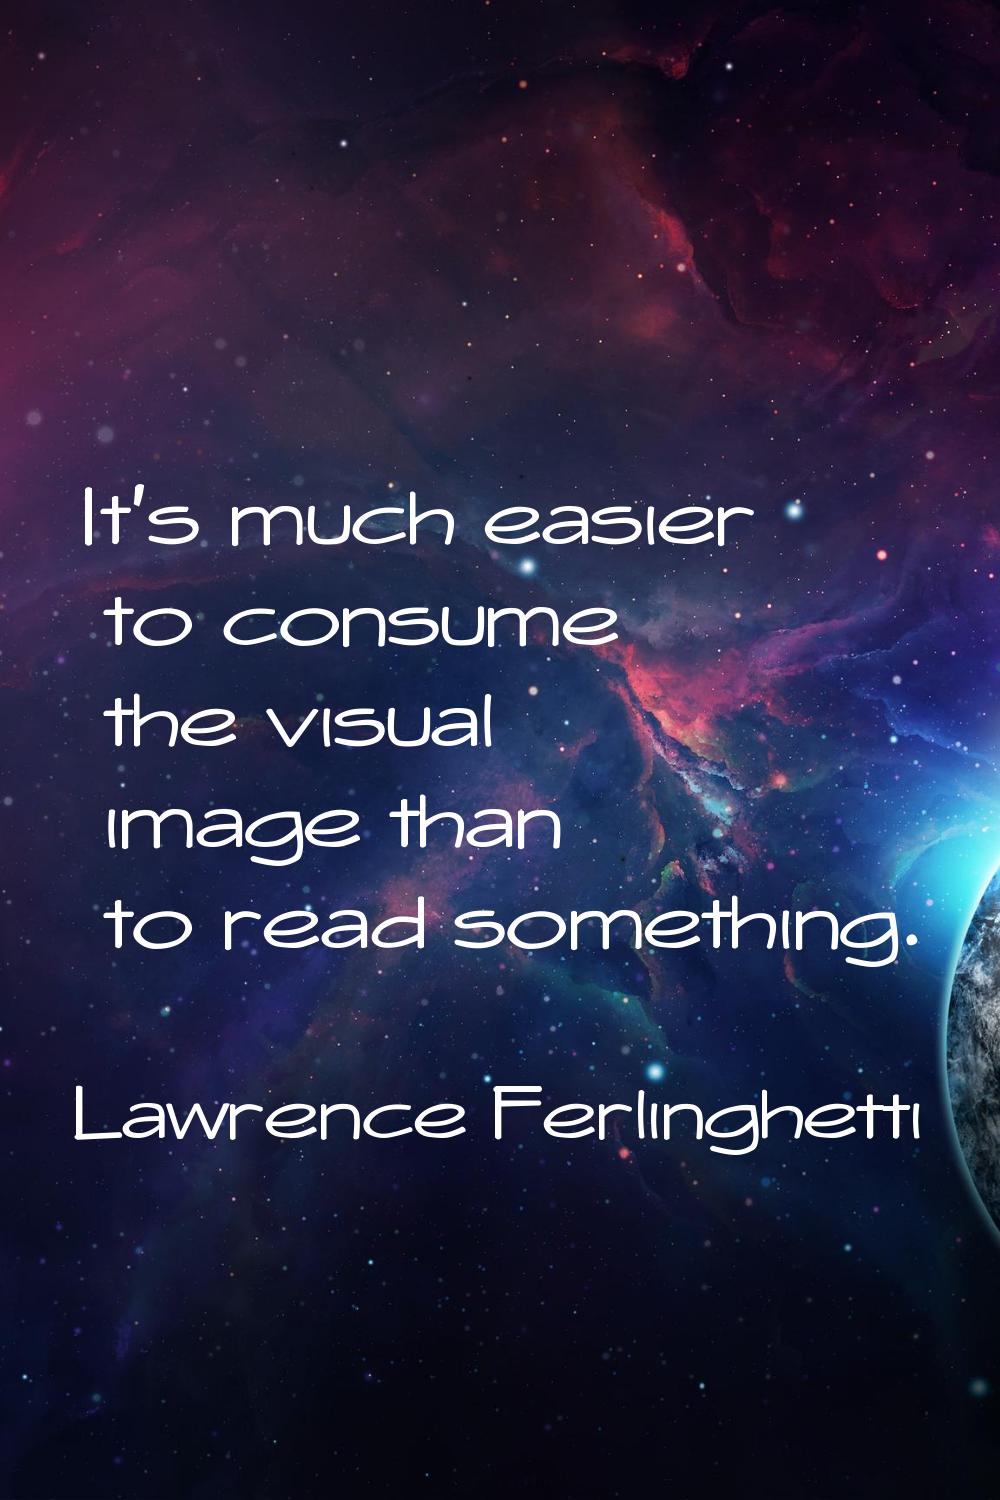 It's much easier to consume the visual image than to read something.